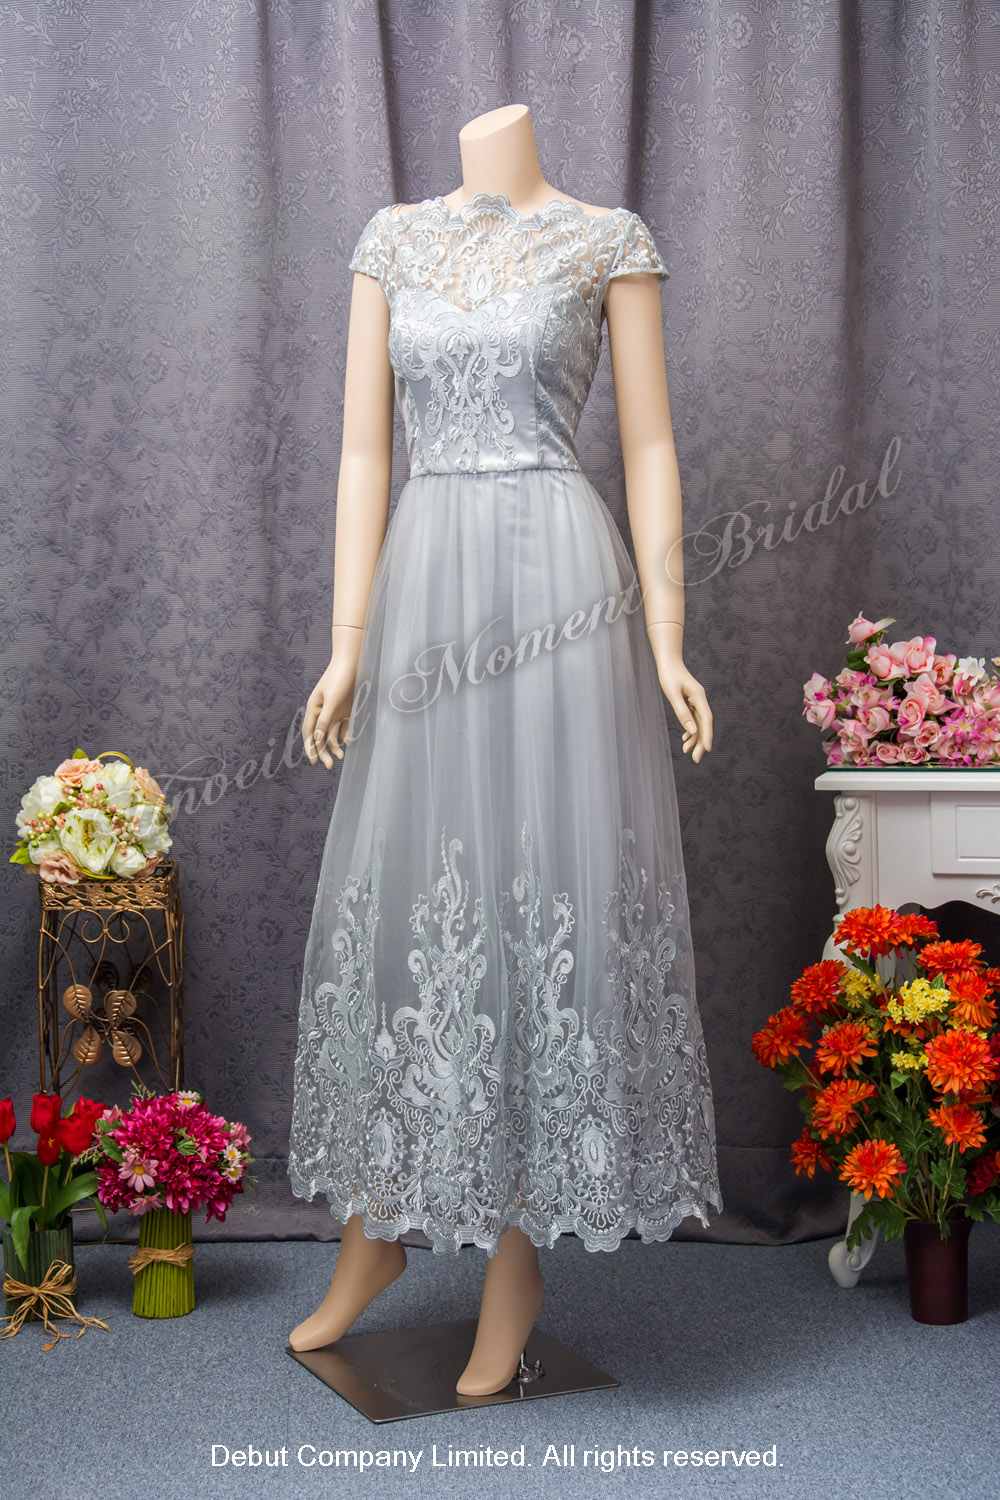 Short sleeves, boat neckline, floor length silver party Dress with lace appliques 短袖銀色蕾絲宴會晩裝裙